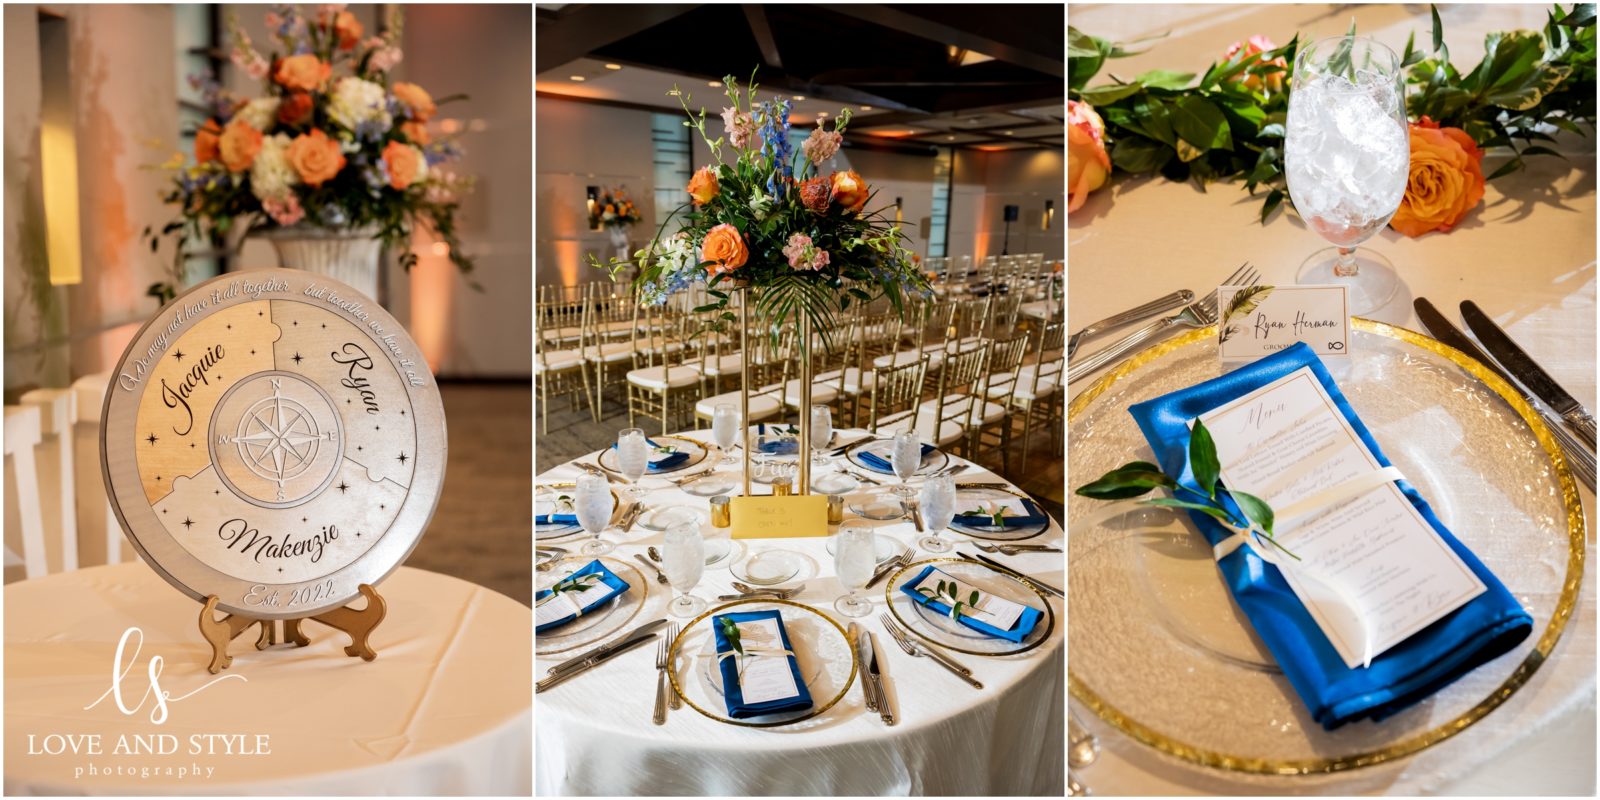 Reception details at a Wedding at Selby Gardens Sarasota